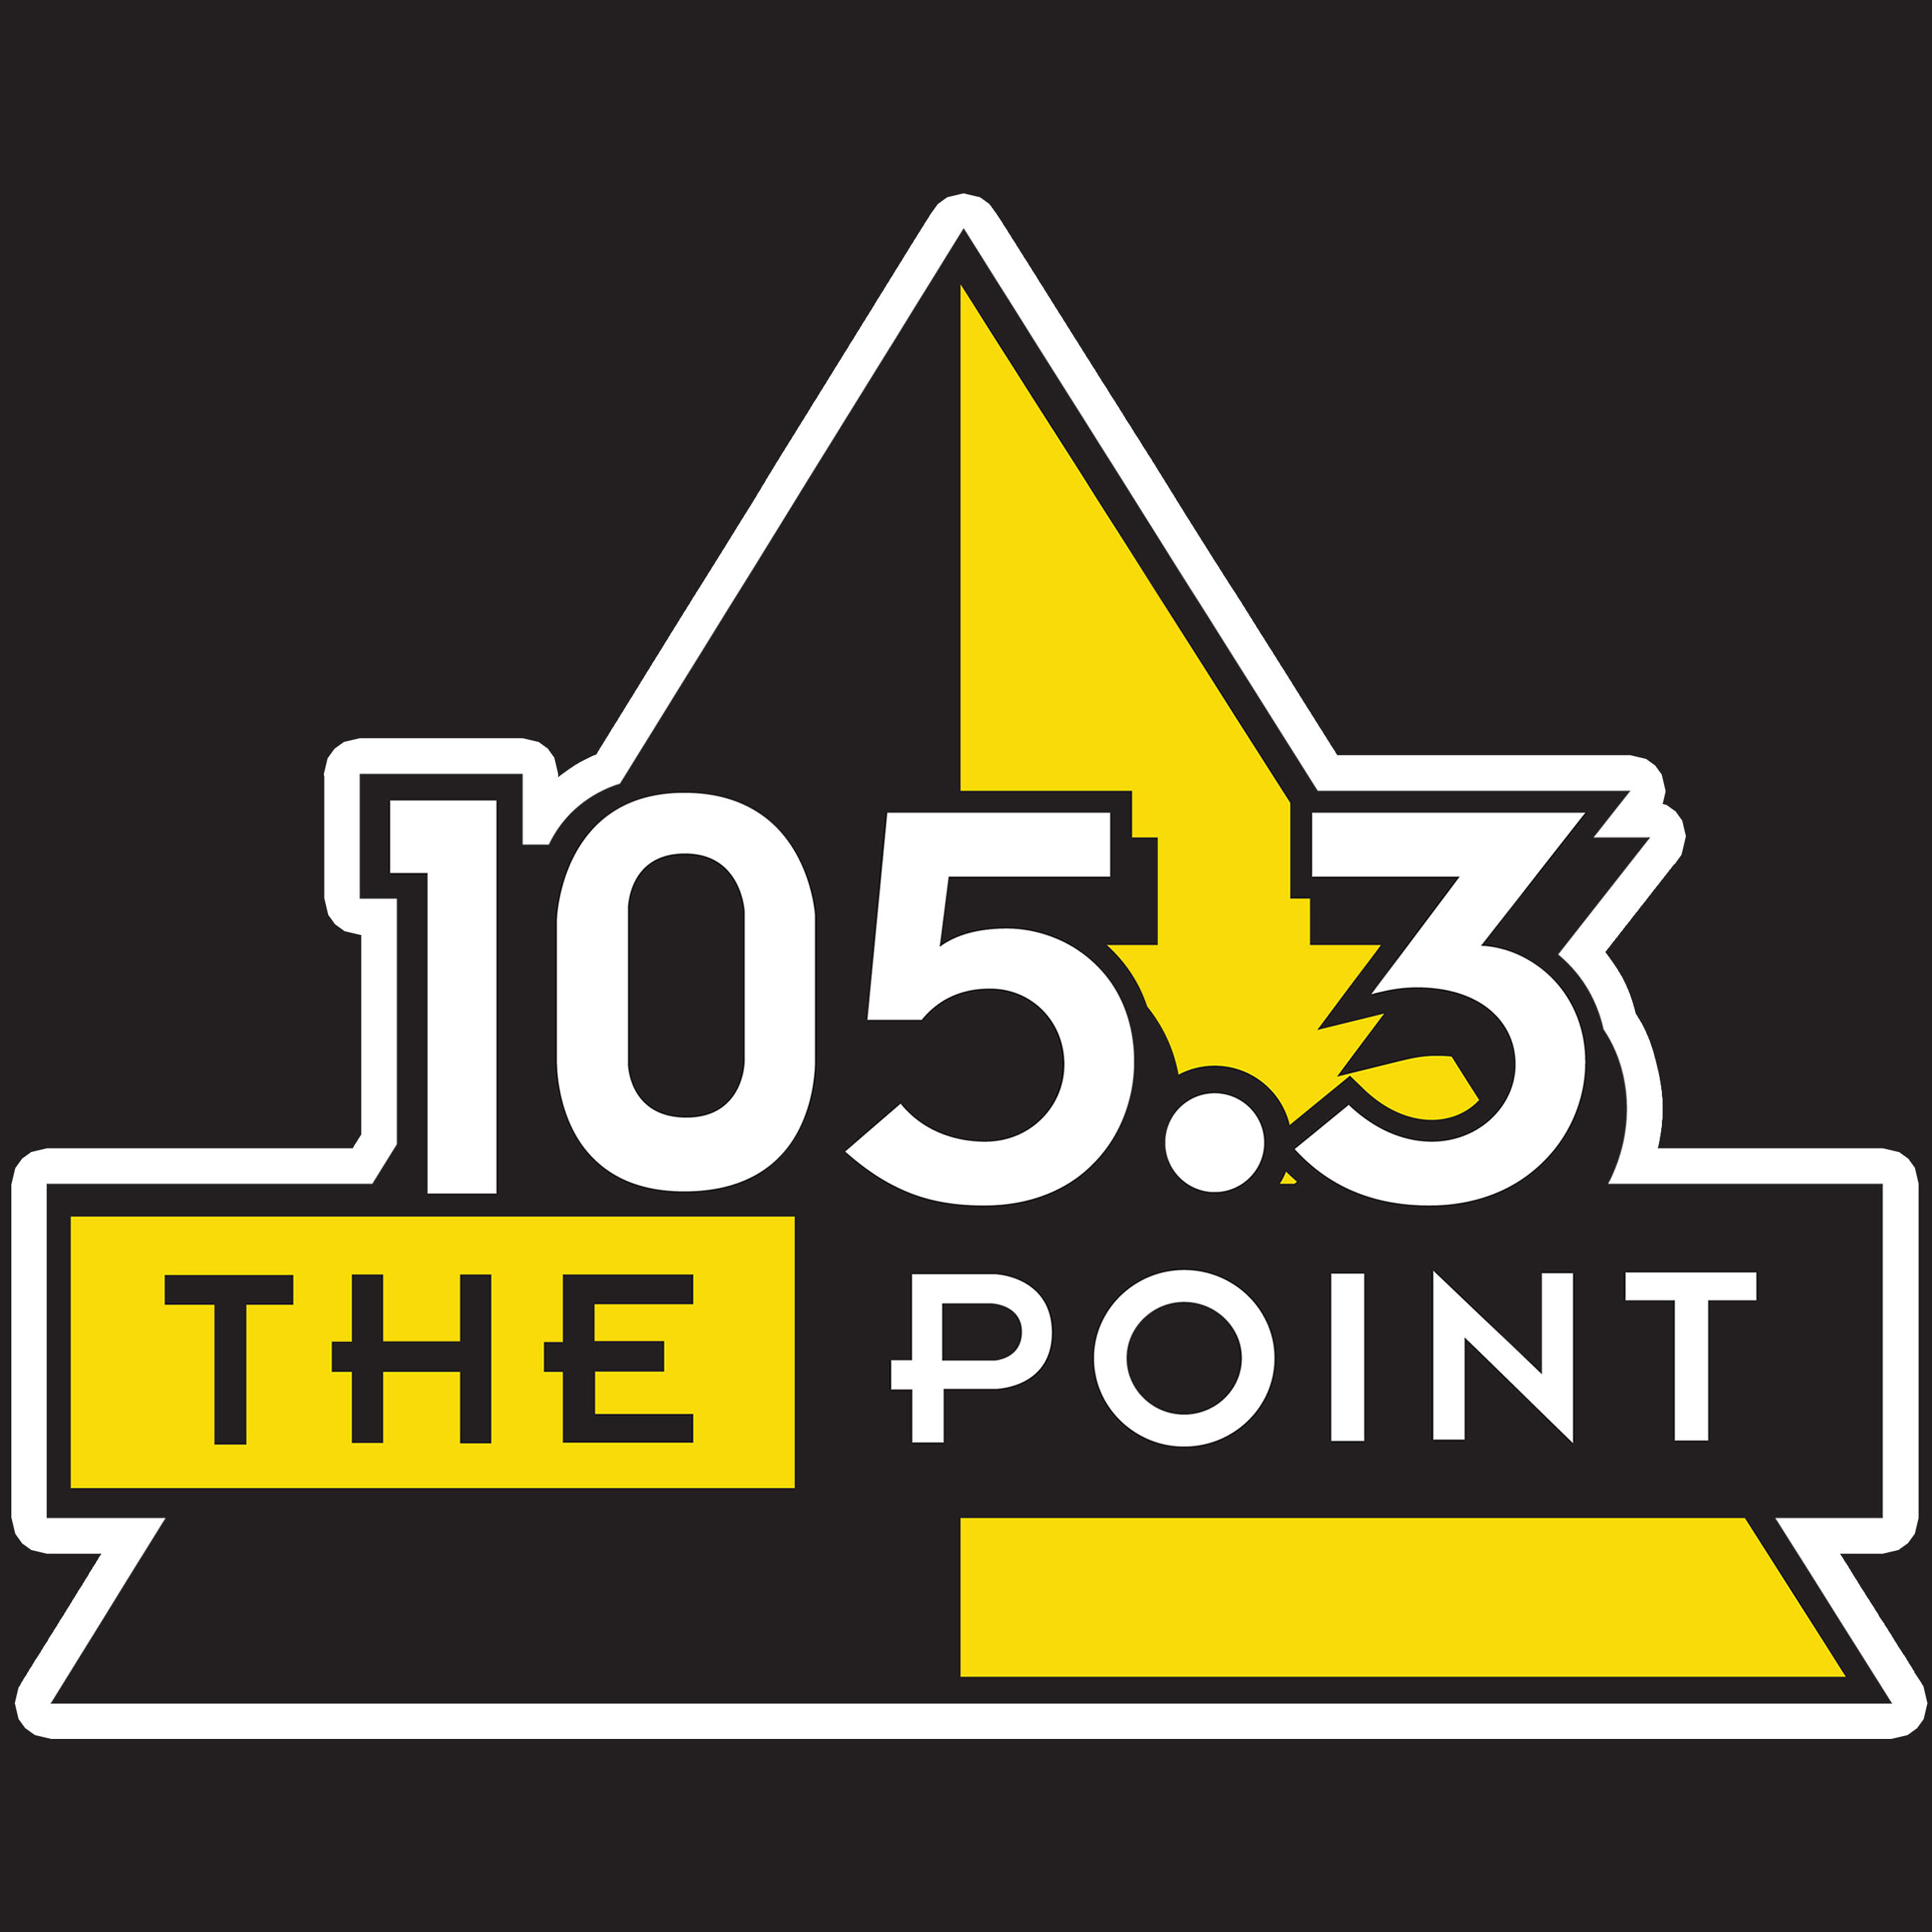 105.3 The Point